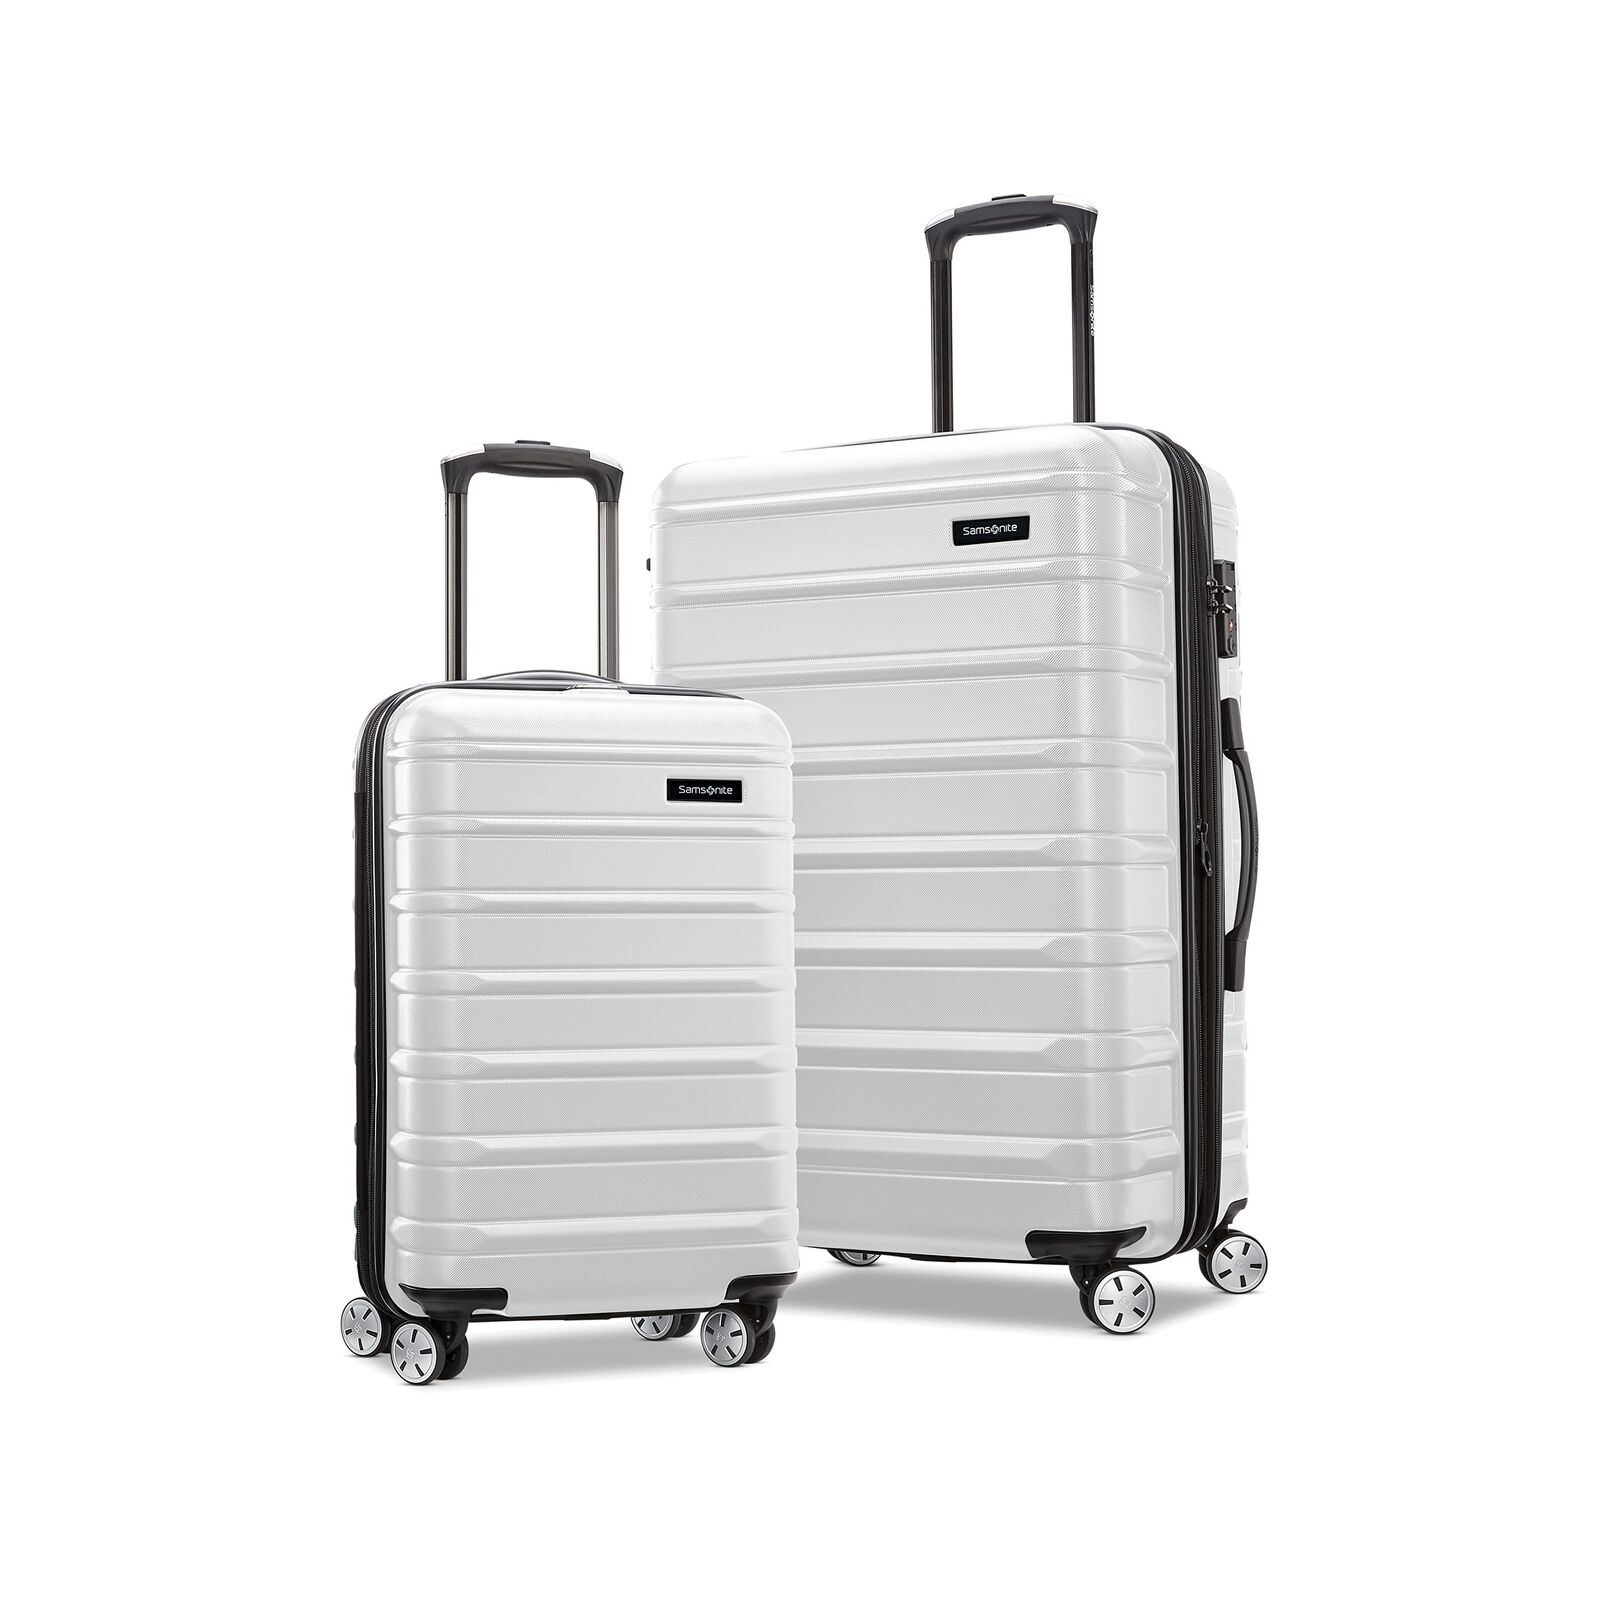 Looking to Buy Luggage This Year. Here are 10 Reasons the Samsonite Quantum Max 2-Piece Set Should Top Your List